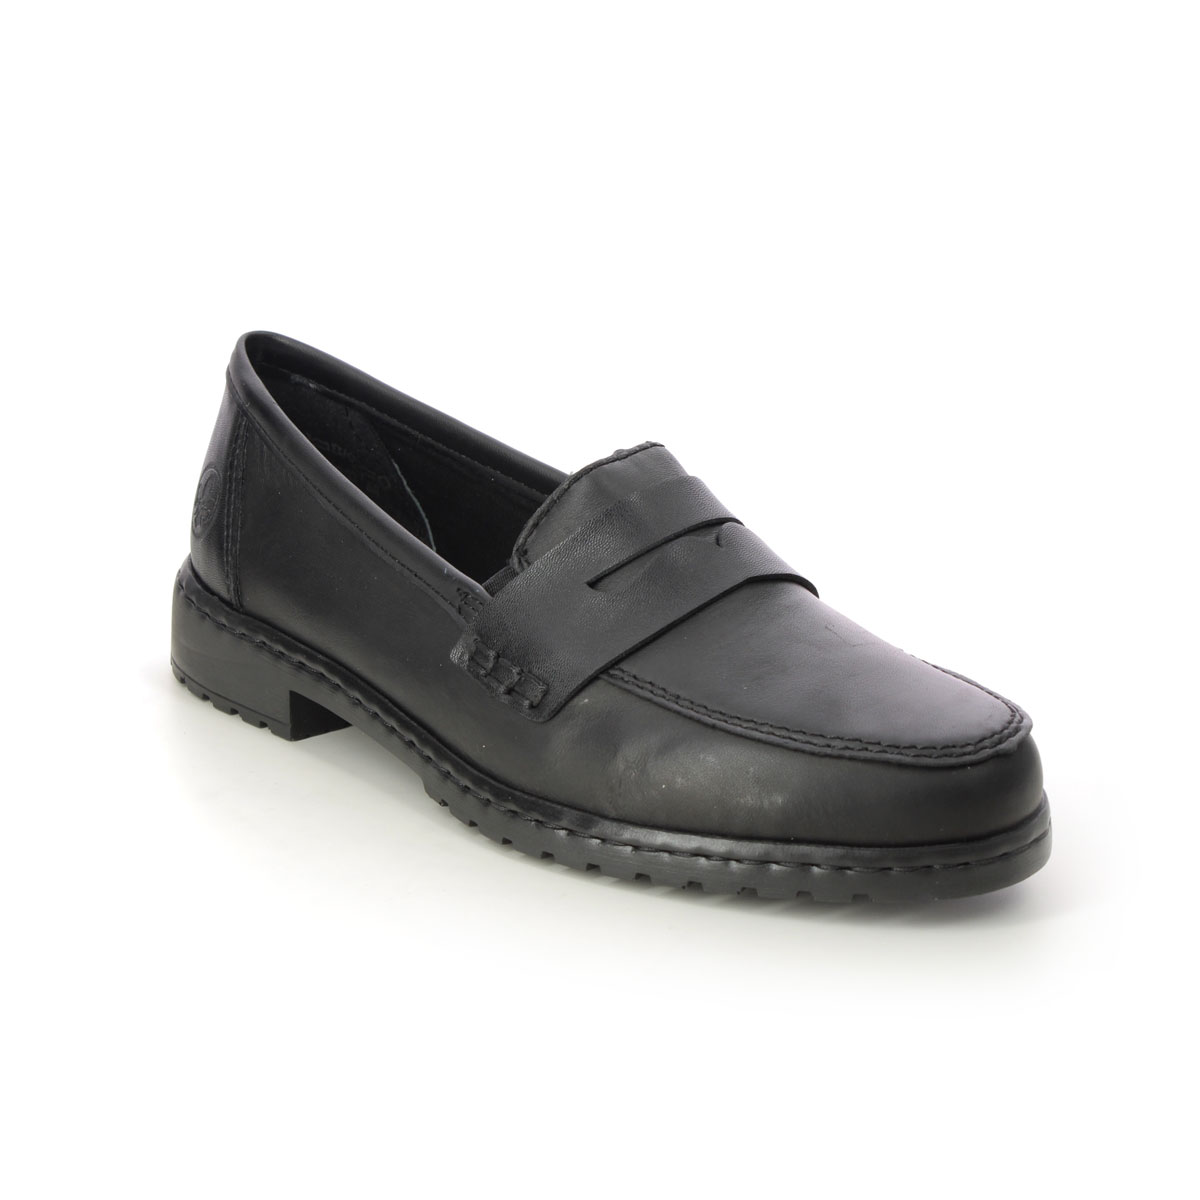 Rieker 51867-00 Black leather Womens loafers in a Plain Leather in Size 41